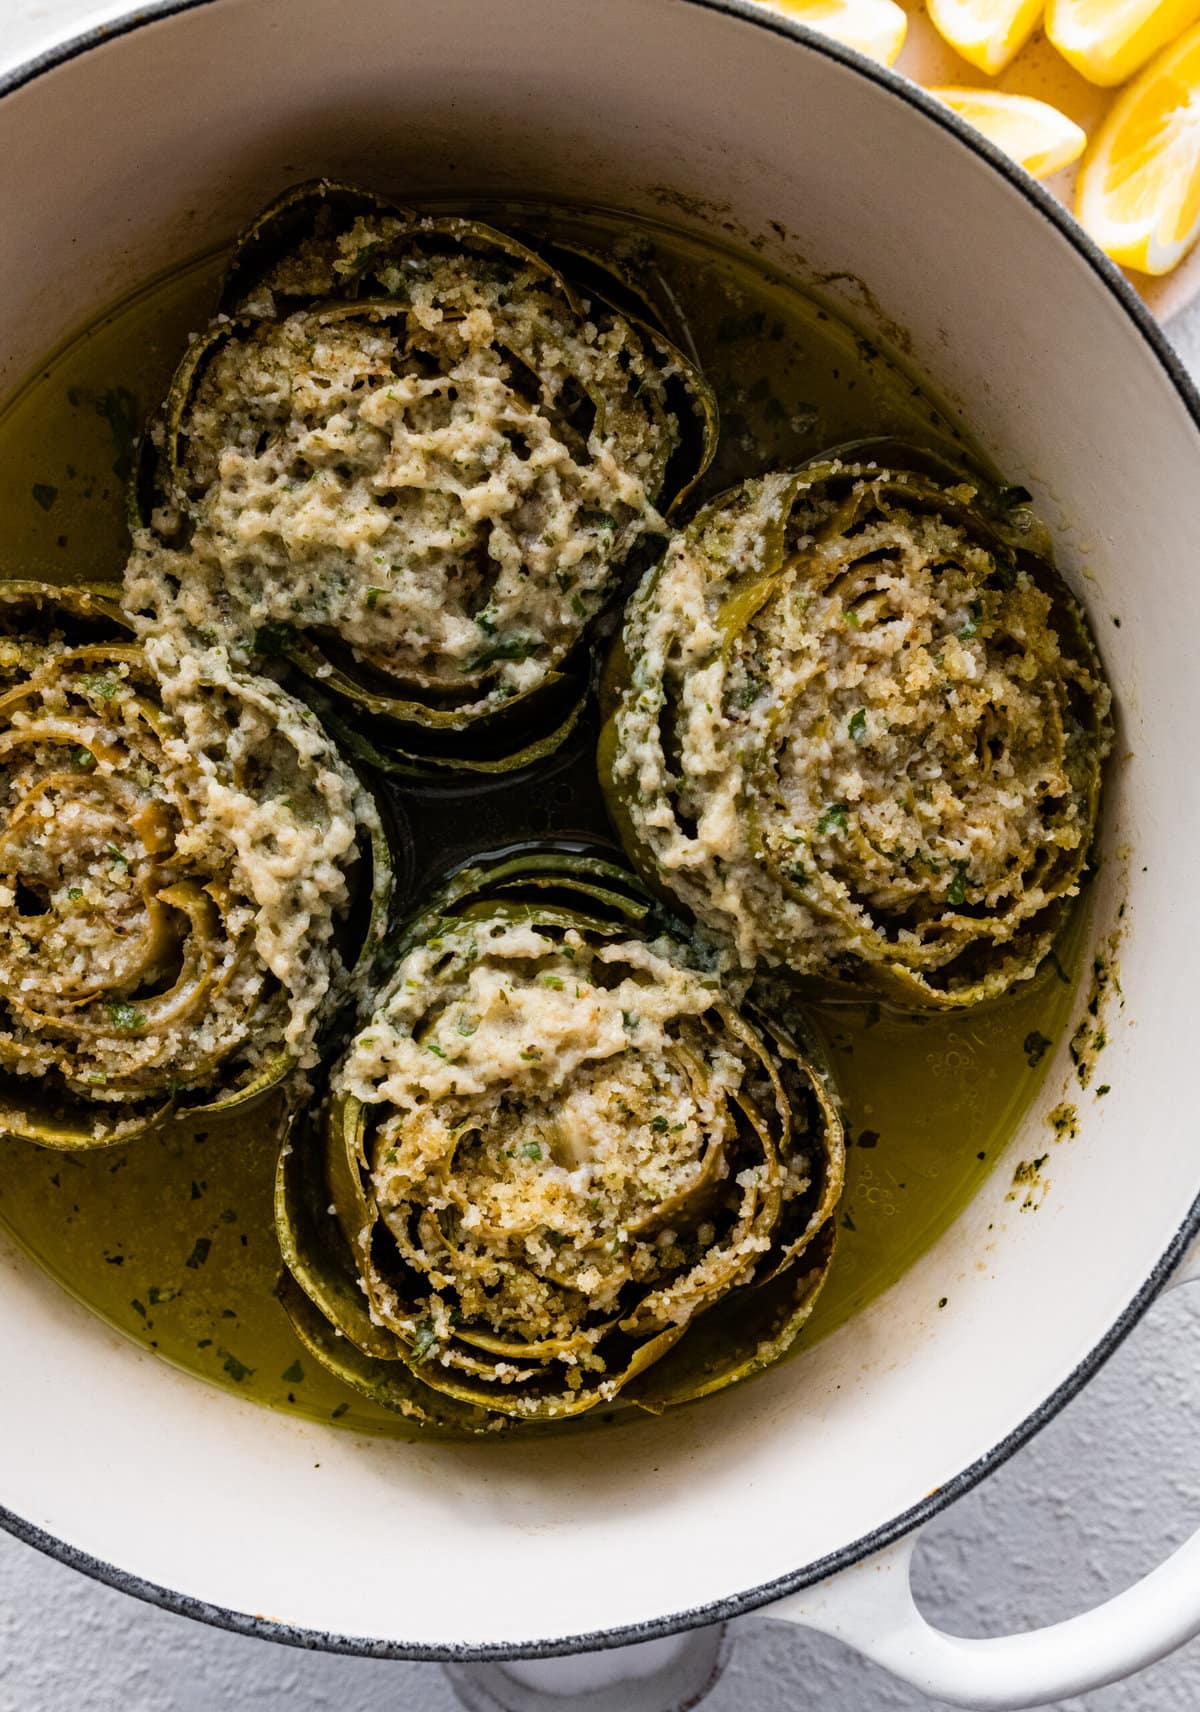 how to make stuffed artichokes step-by-step photos- cooked artichokes in pot with filling.